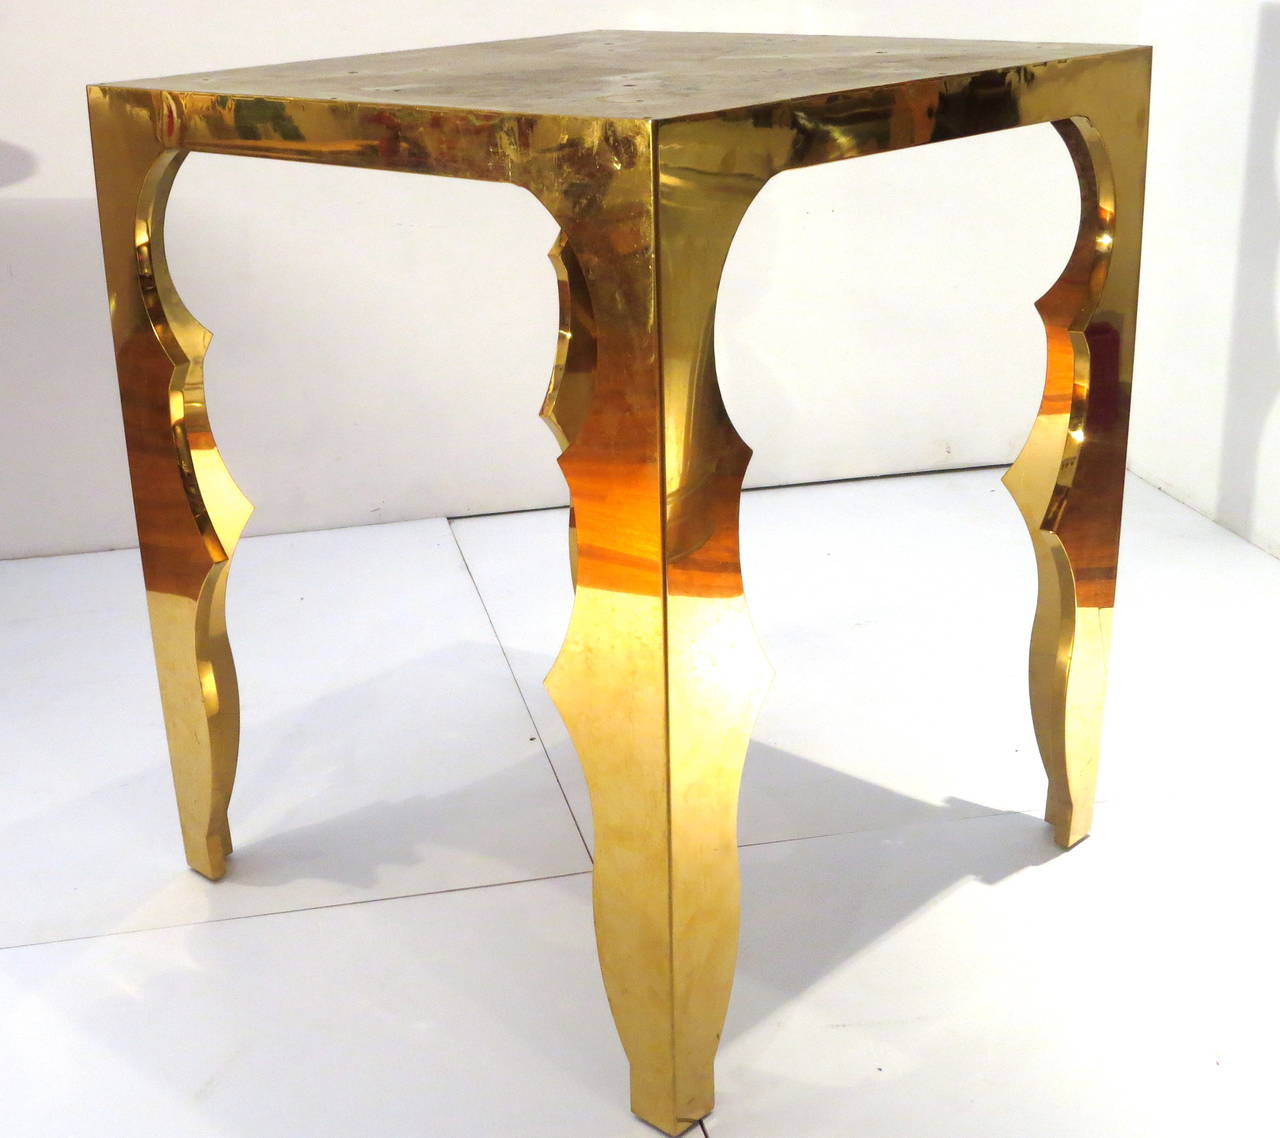 American Monumental Large Brass Entry Table Hand-Hammered Top Scalloped Edge